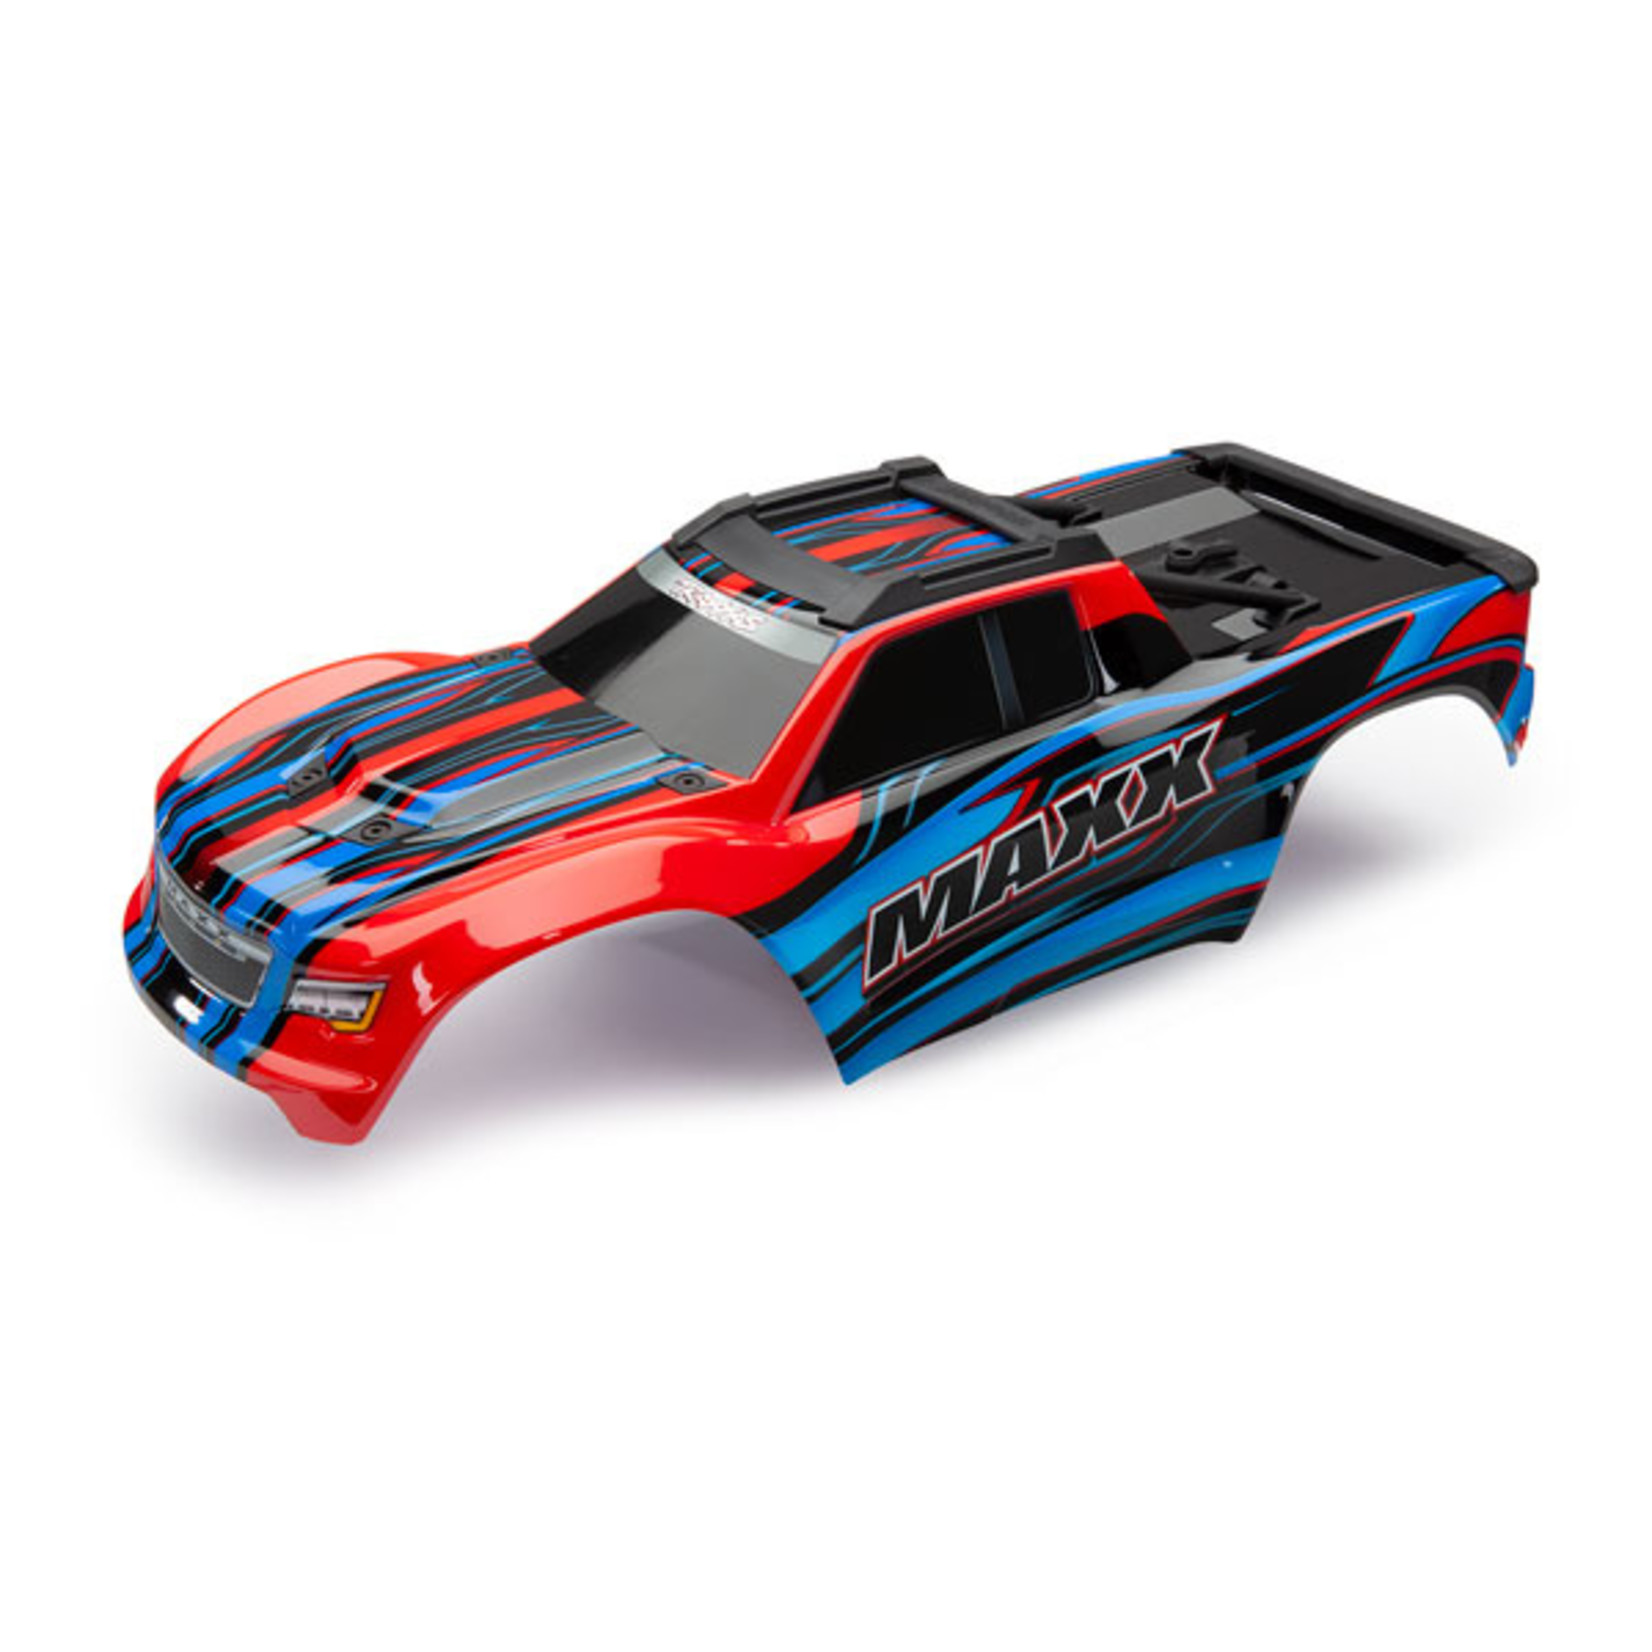 Traxxas 8911P - Body, Maxx, red-x (painted)/ decal sheet